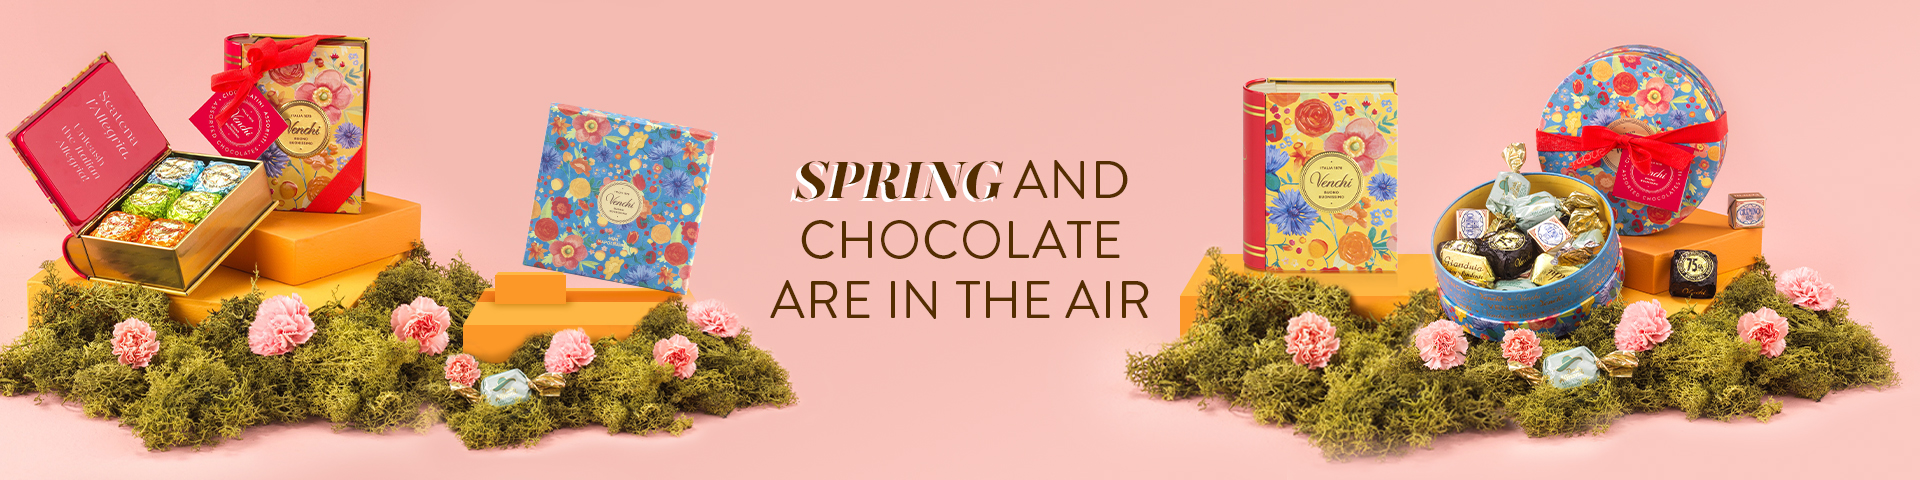 Spring and chocolate are in the air